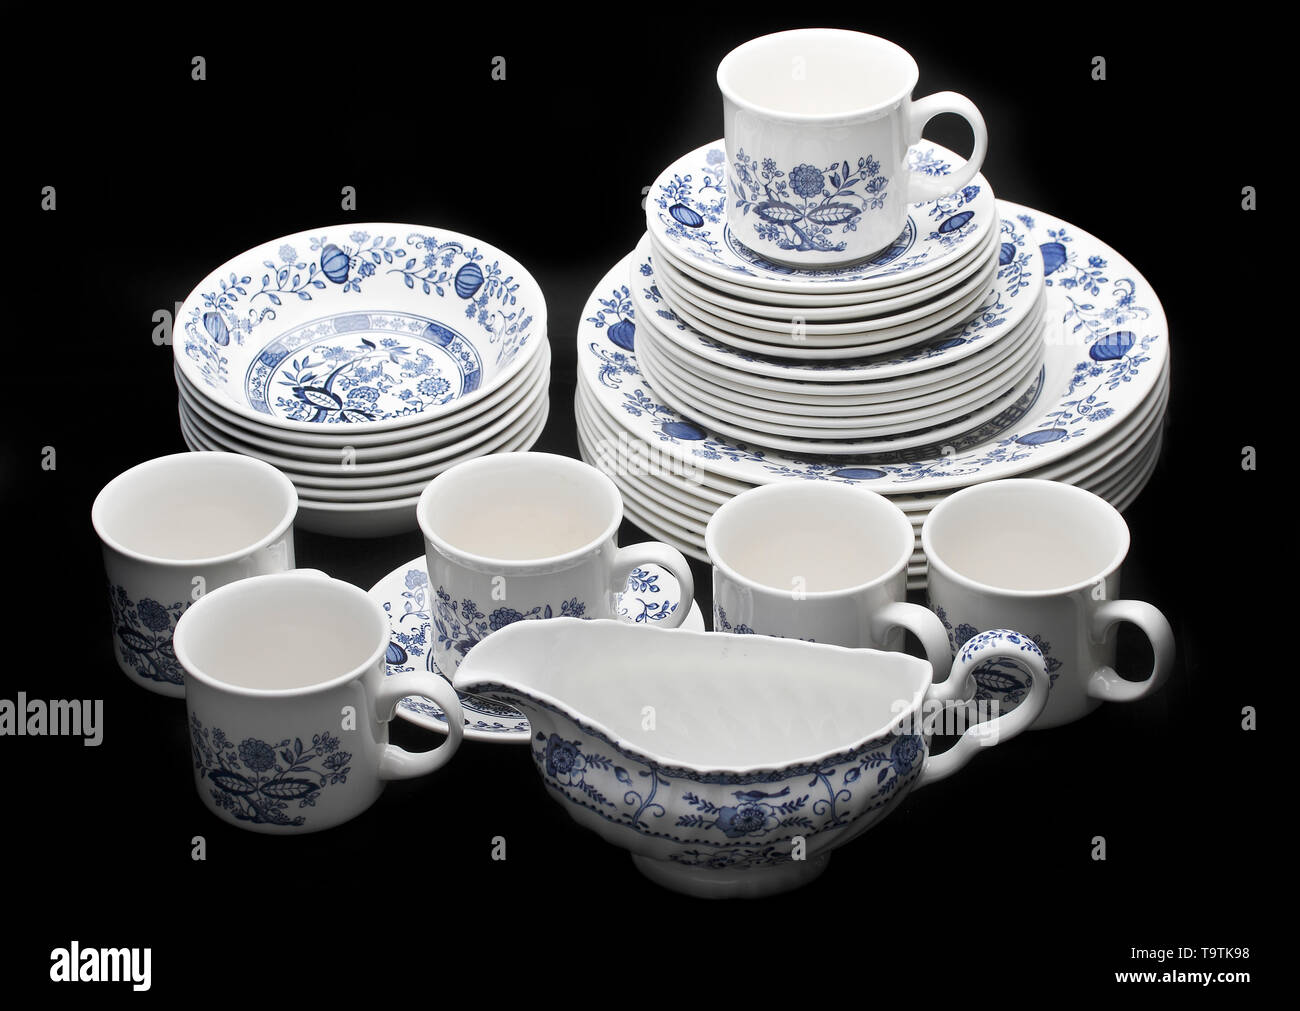 Churchill pottery, Blue Onion - 8 dinner plates, 7 side plates, 7 saucers,  6 cups, 7 dishes, 1 gravy boat - 36 items Name: Churchill pottery, 8 dinner  Stock Photo - Alamy